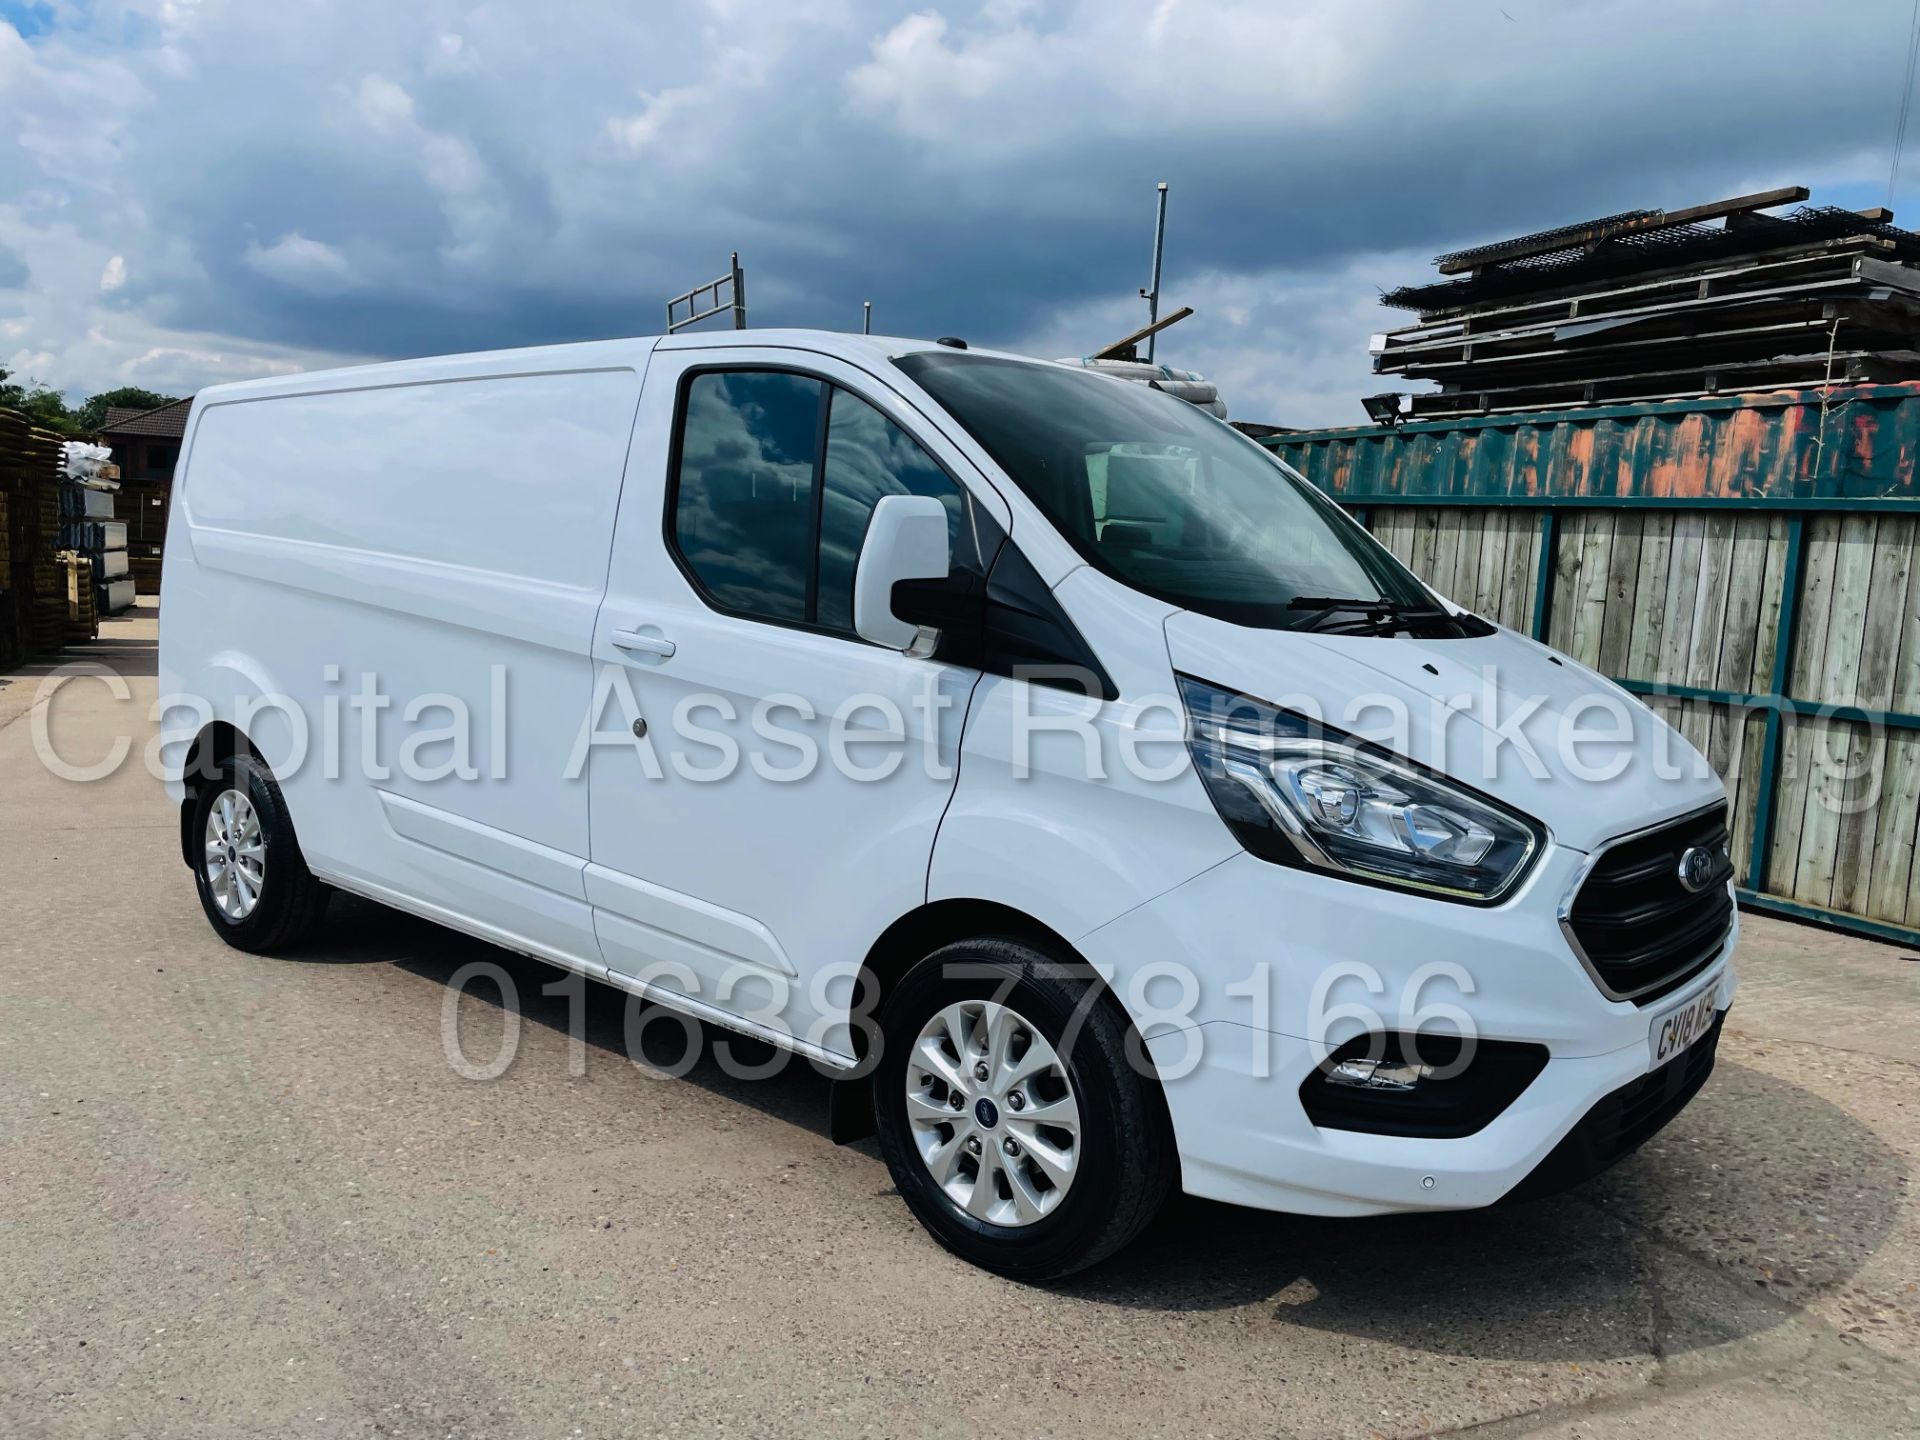 FORD TRANSIT CUSTOM *LIMITED EDITION* PANEL VAN (2018 - NEW MODEL) '2.0 TDCI - EURO 6 - 6 SPEED' - Image 12 of 46